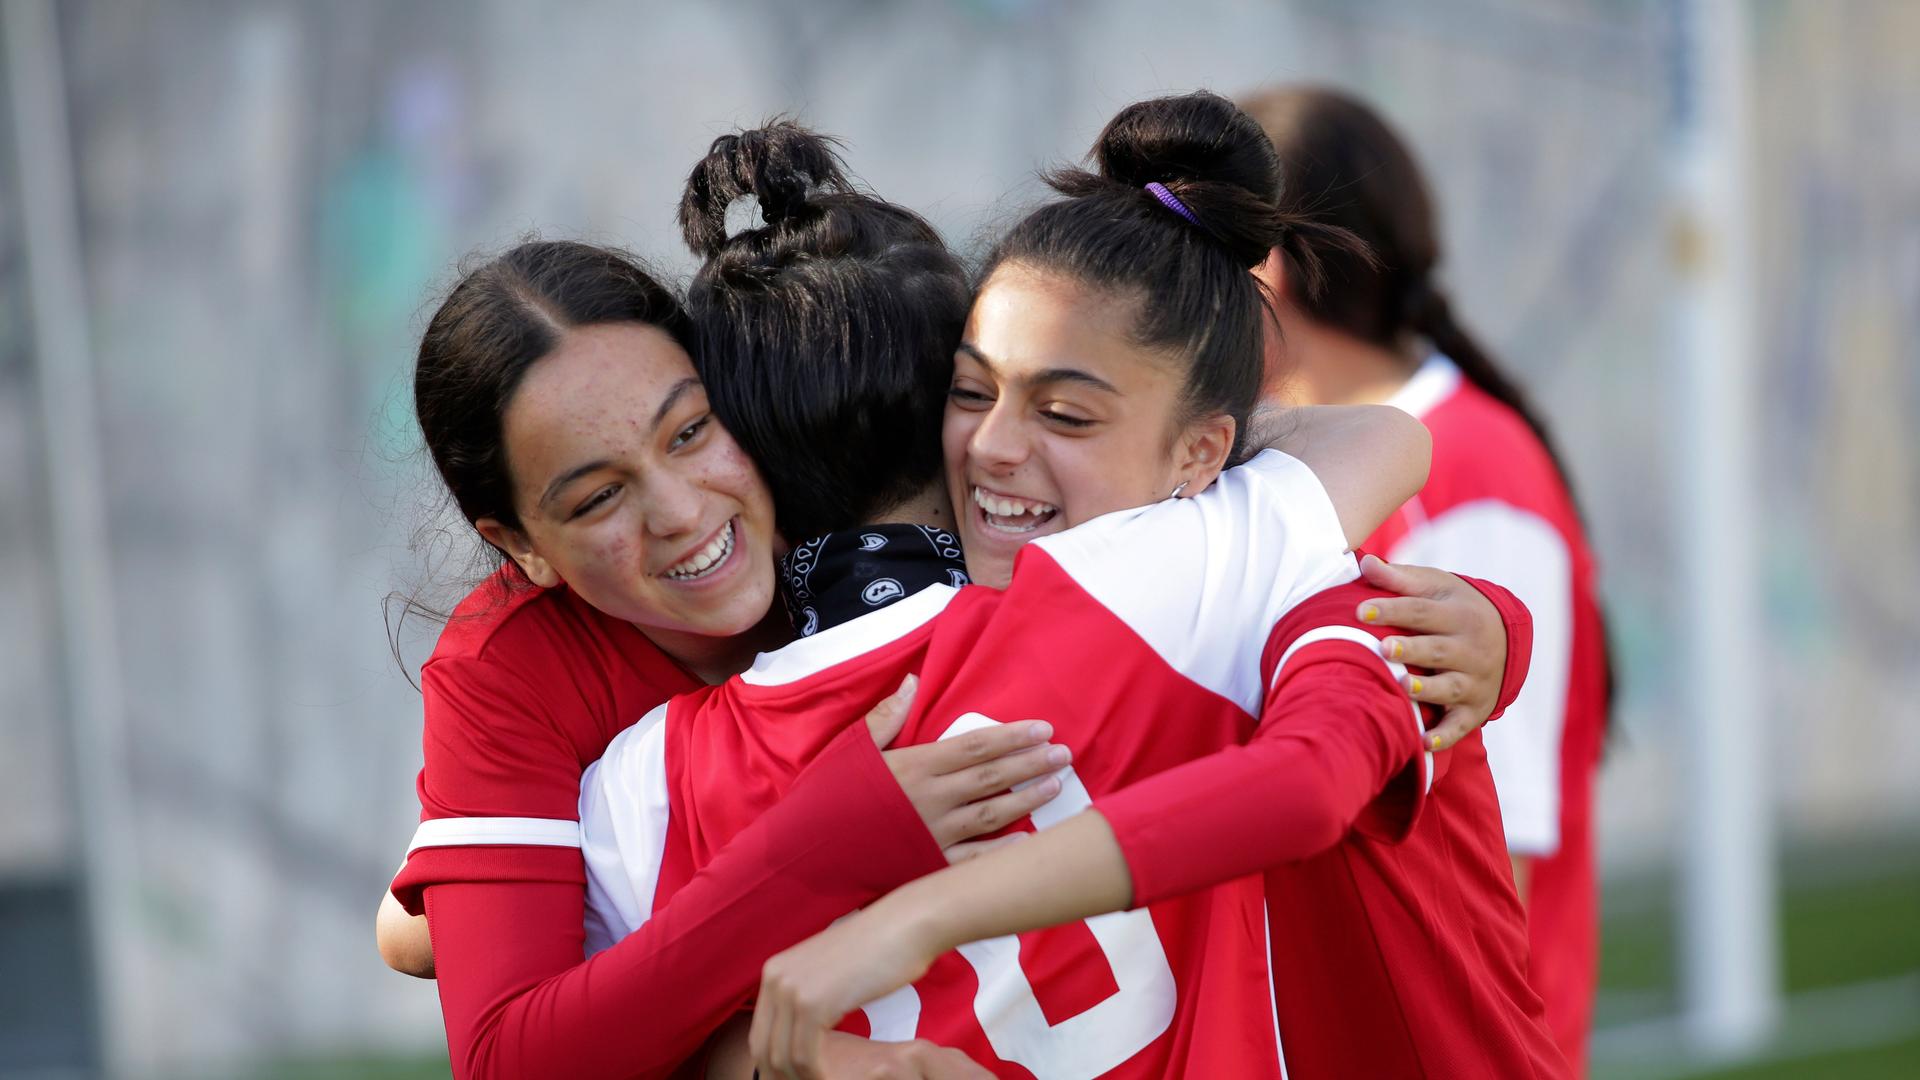 Members of the Afghanistan national girls soccer teams hug during a training session at a soccer pitch in Odivelas, outside Lisbon, Thursday, Sept. 30, 2021. The girls and their families arrived in Portugal Sept.19 after an international coalition came to their rescue. (AP Photo/Ana Brigida)